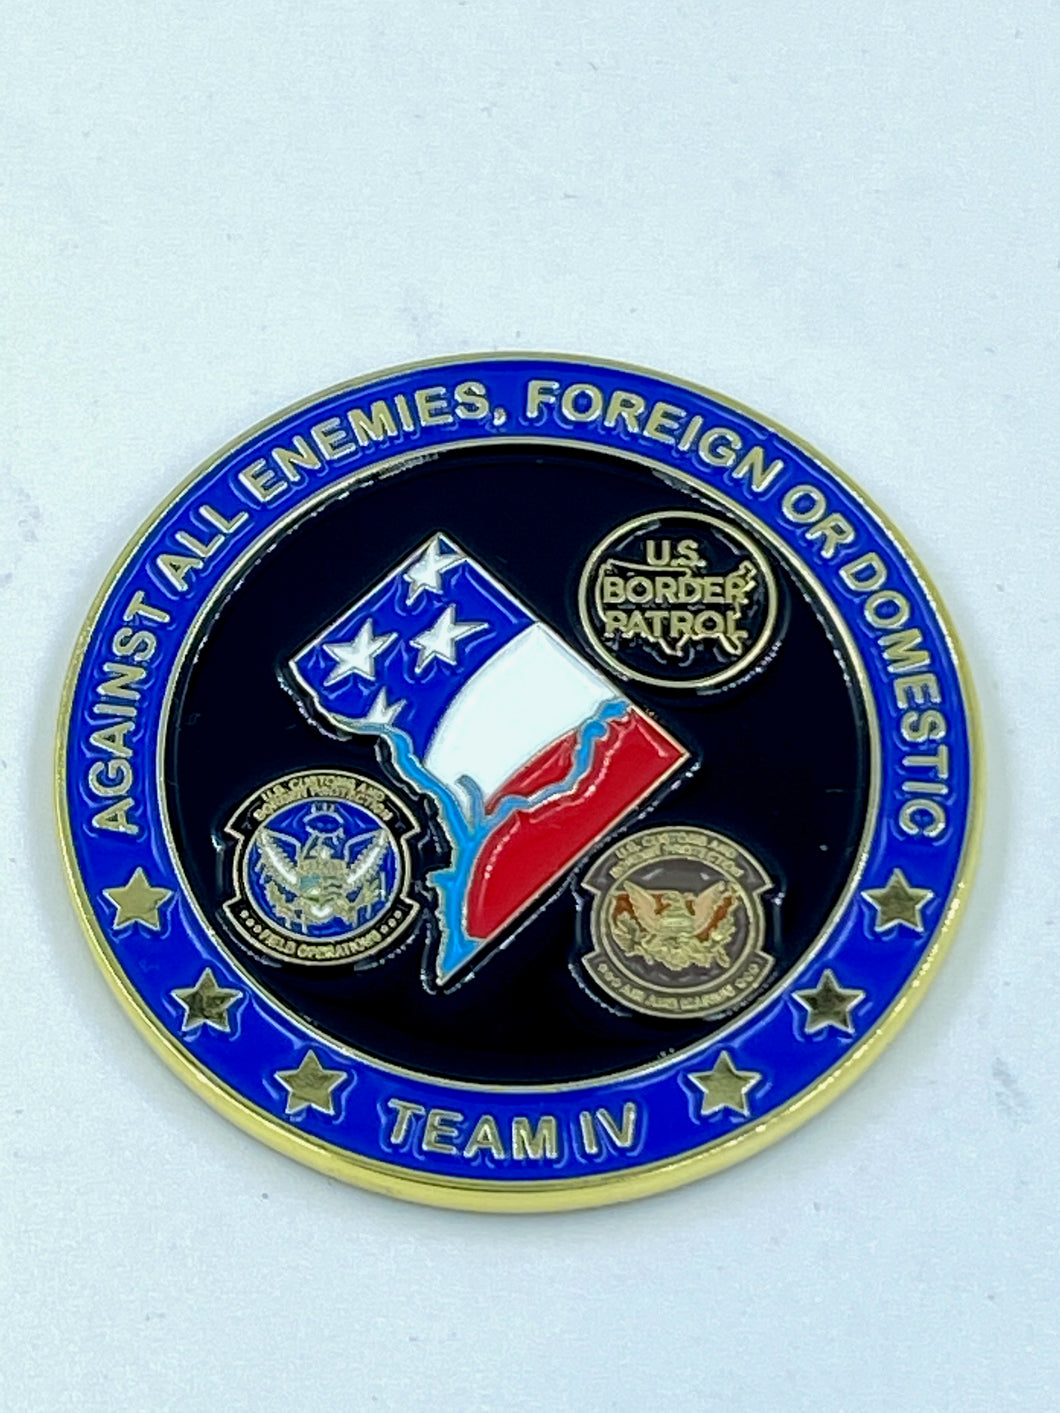 PACT RDT US Customs and Border Patrol Challenge Coin CBP Team IV Honor First Washington DC  MR-16 - www.ChallengeCoinCreations.com